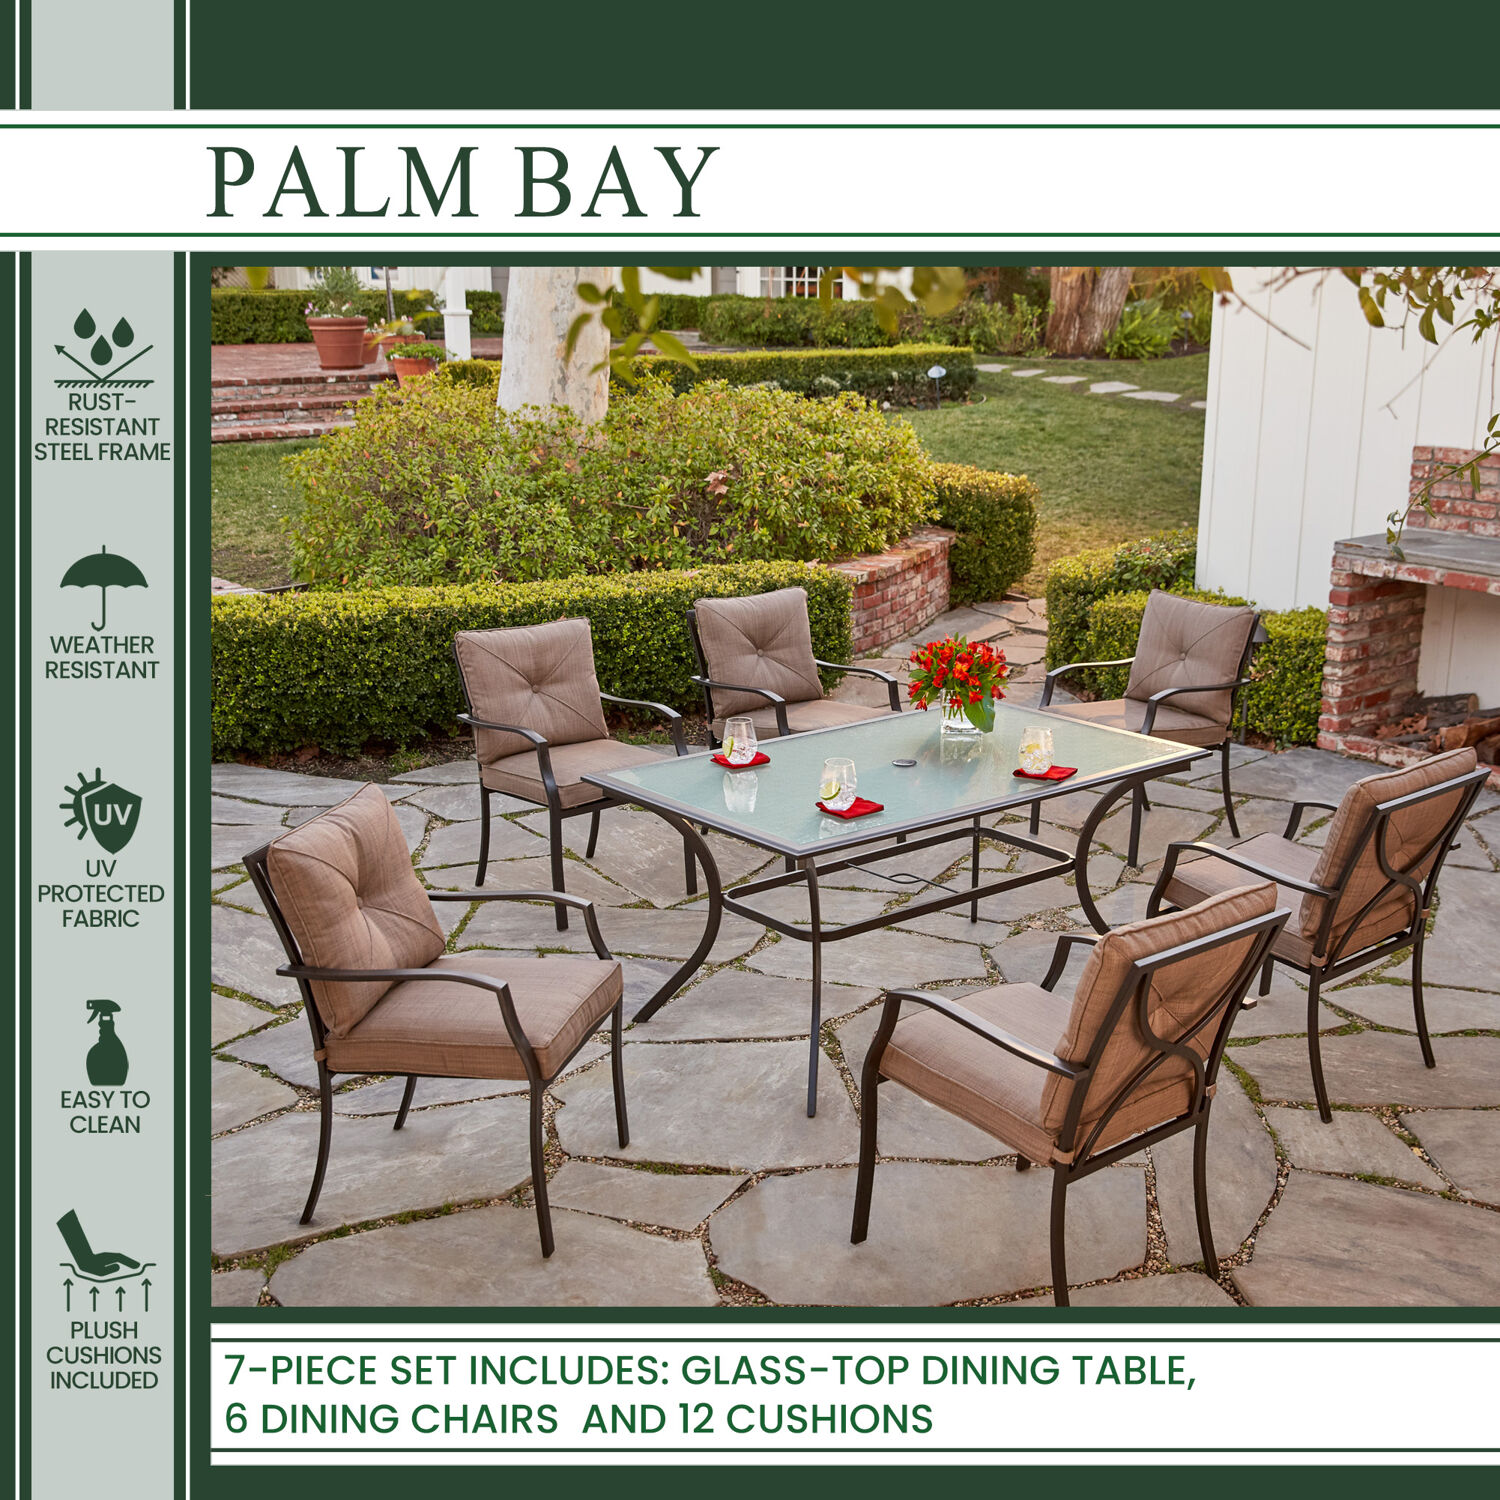 Hanover Palm Bay 7-Piece Steel Outdoor Furniture Patio Dining Set, Seats 6 - image 3 of 23